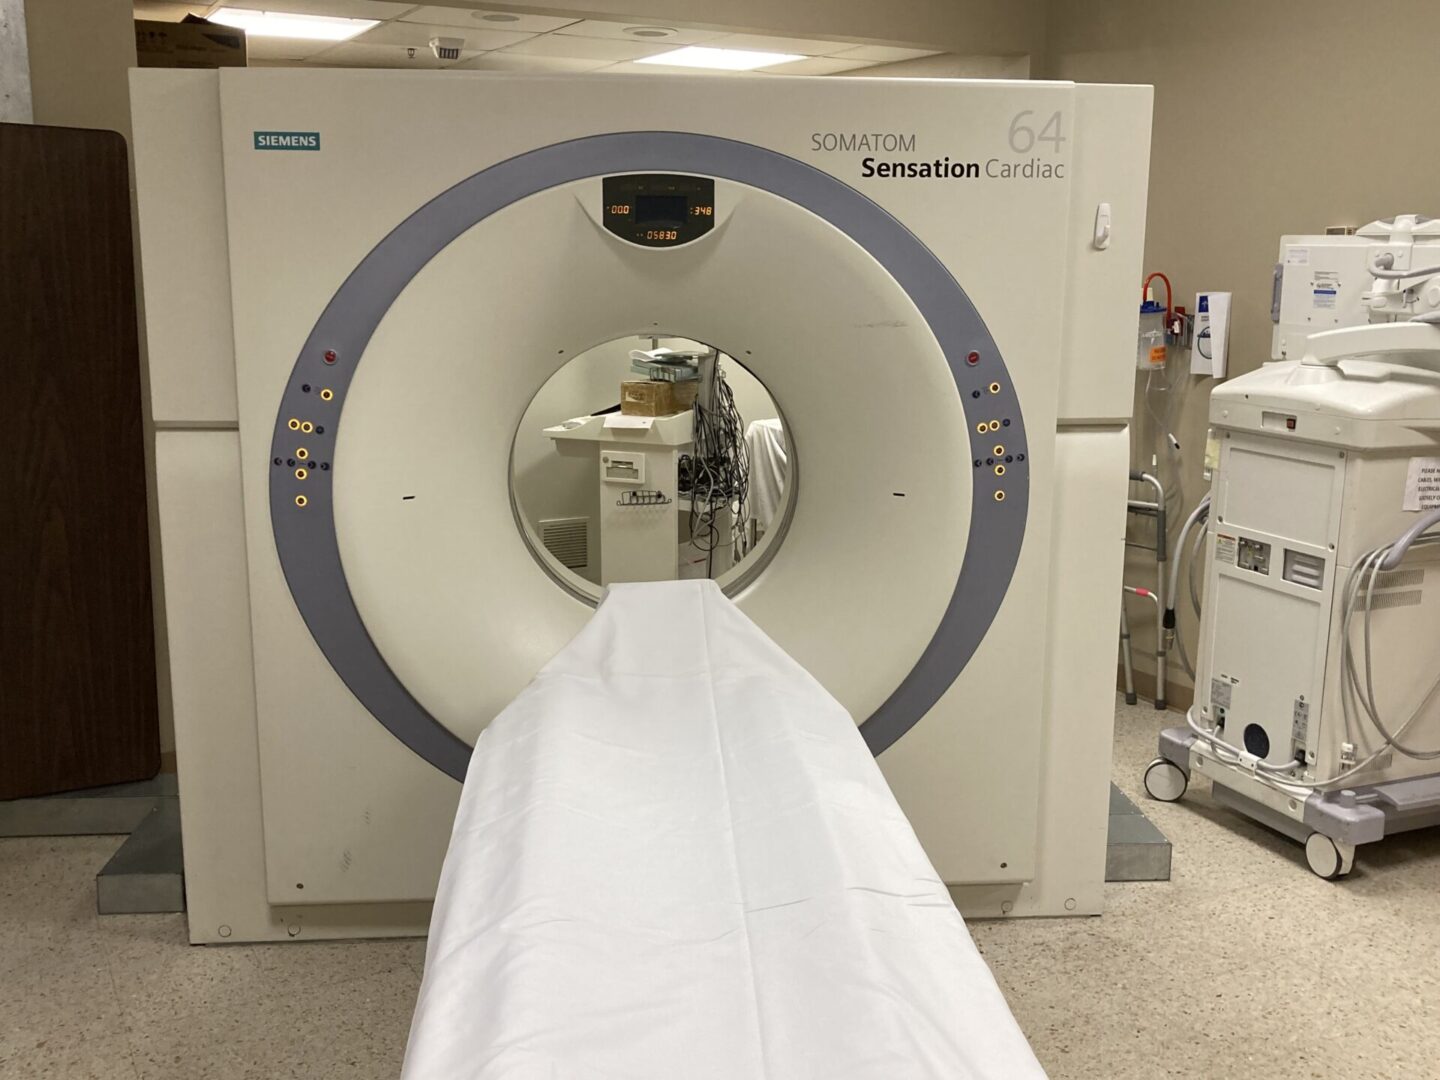 A white blanket is in front of an mri machine.